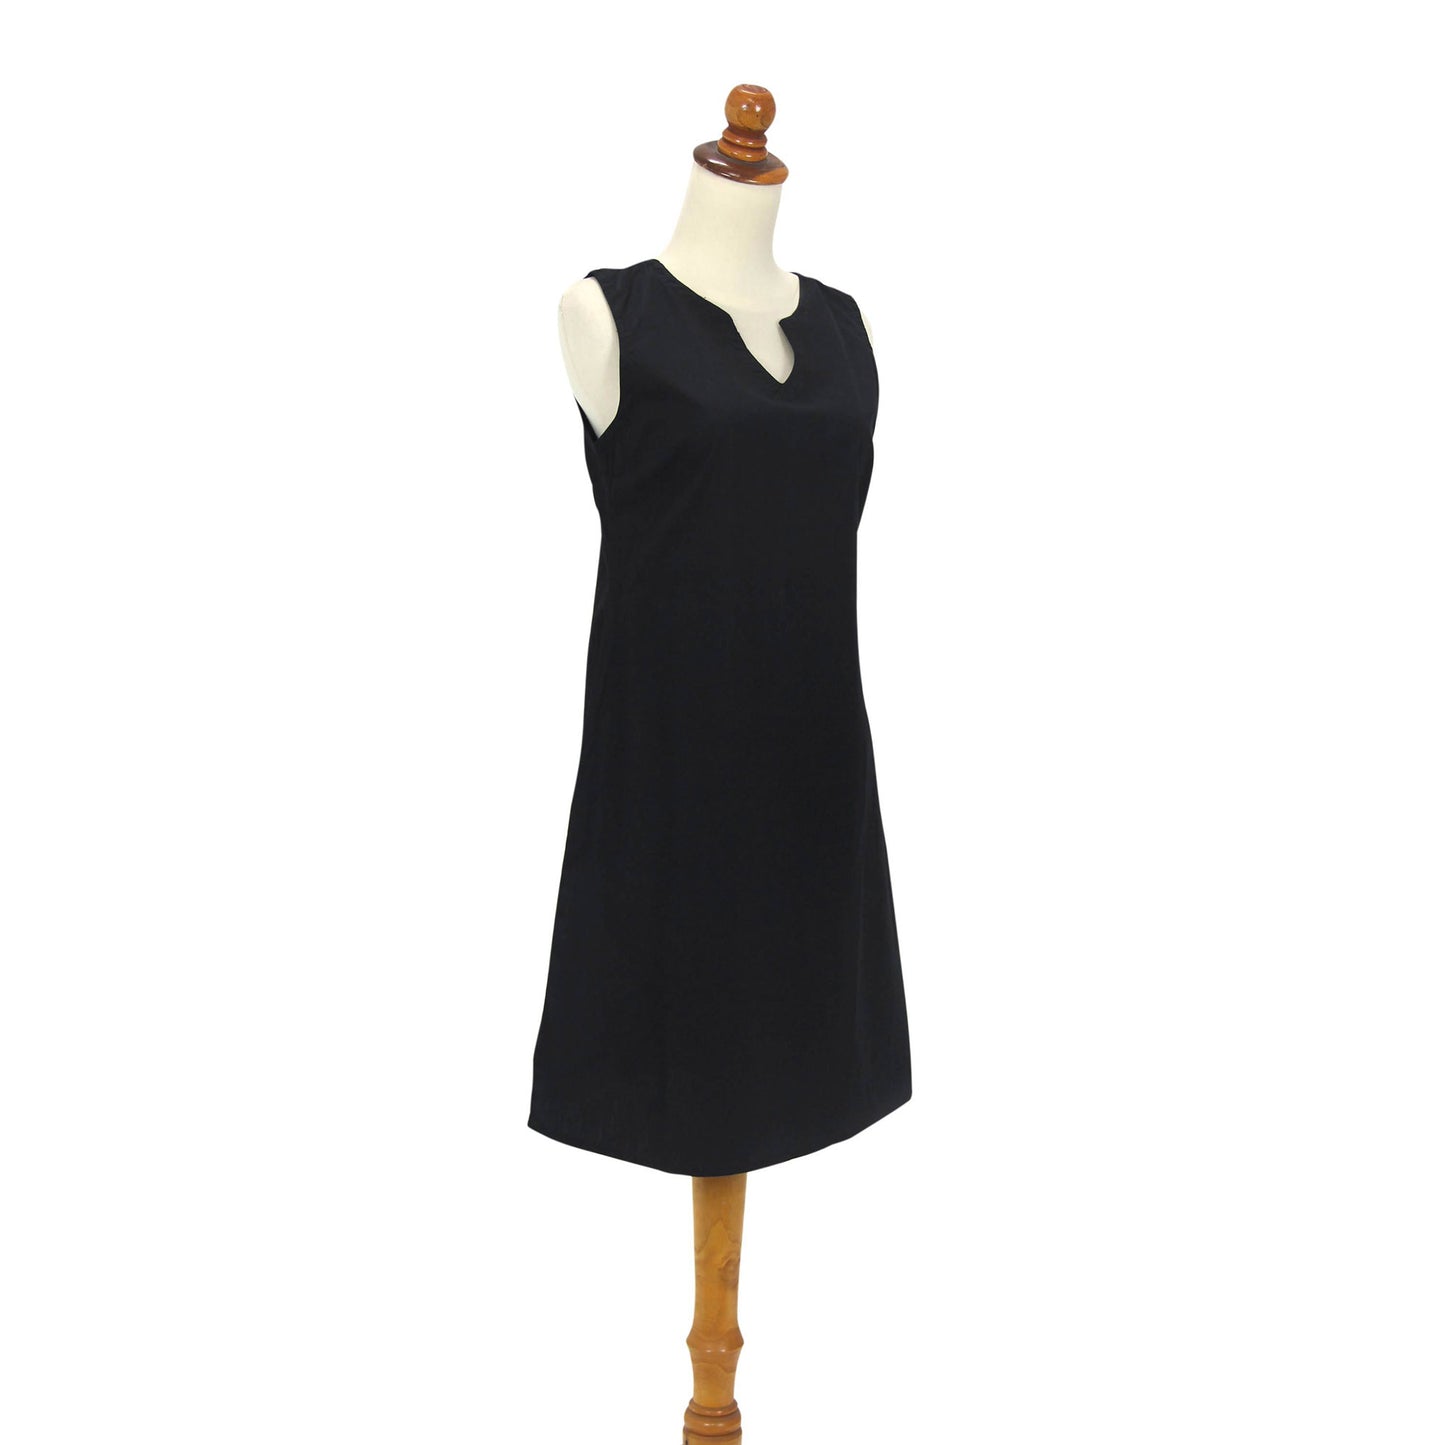 Lily in Black Cotton Shift Dress